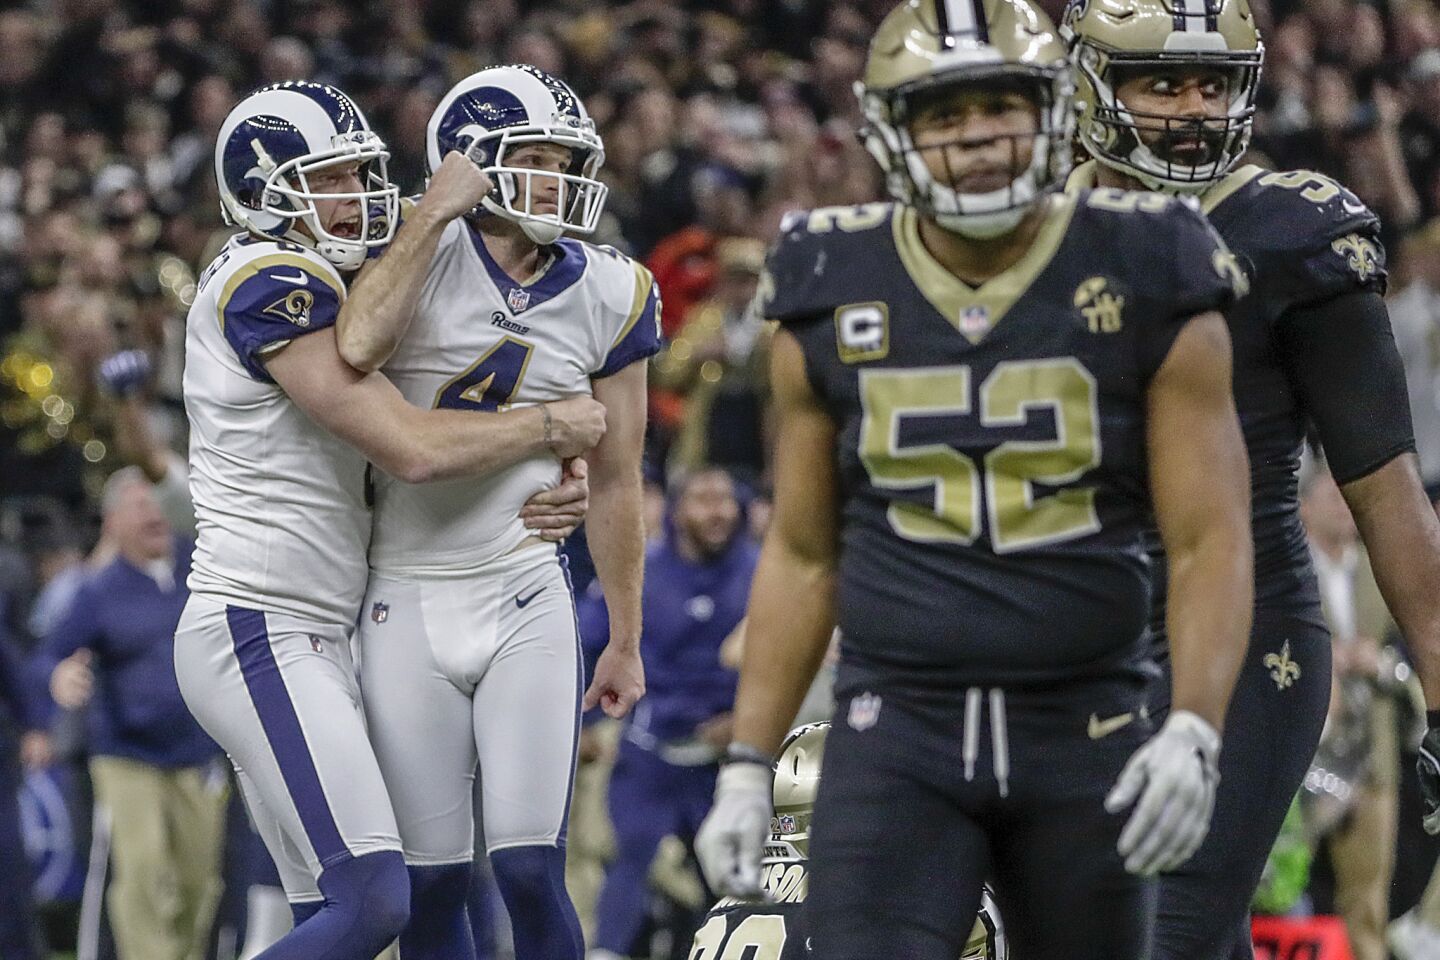 Rams kicker Greg Zuerlein is lifted by teammate Johnny Hekker after hitting a 57-yard field goal in overtime to beat the New Orleans Saints 26-23 in the NFC Championship at the Superdome.